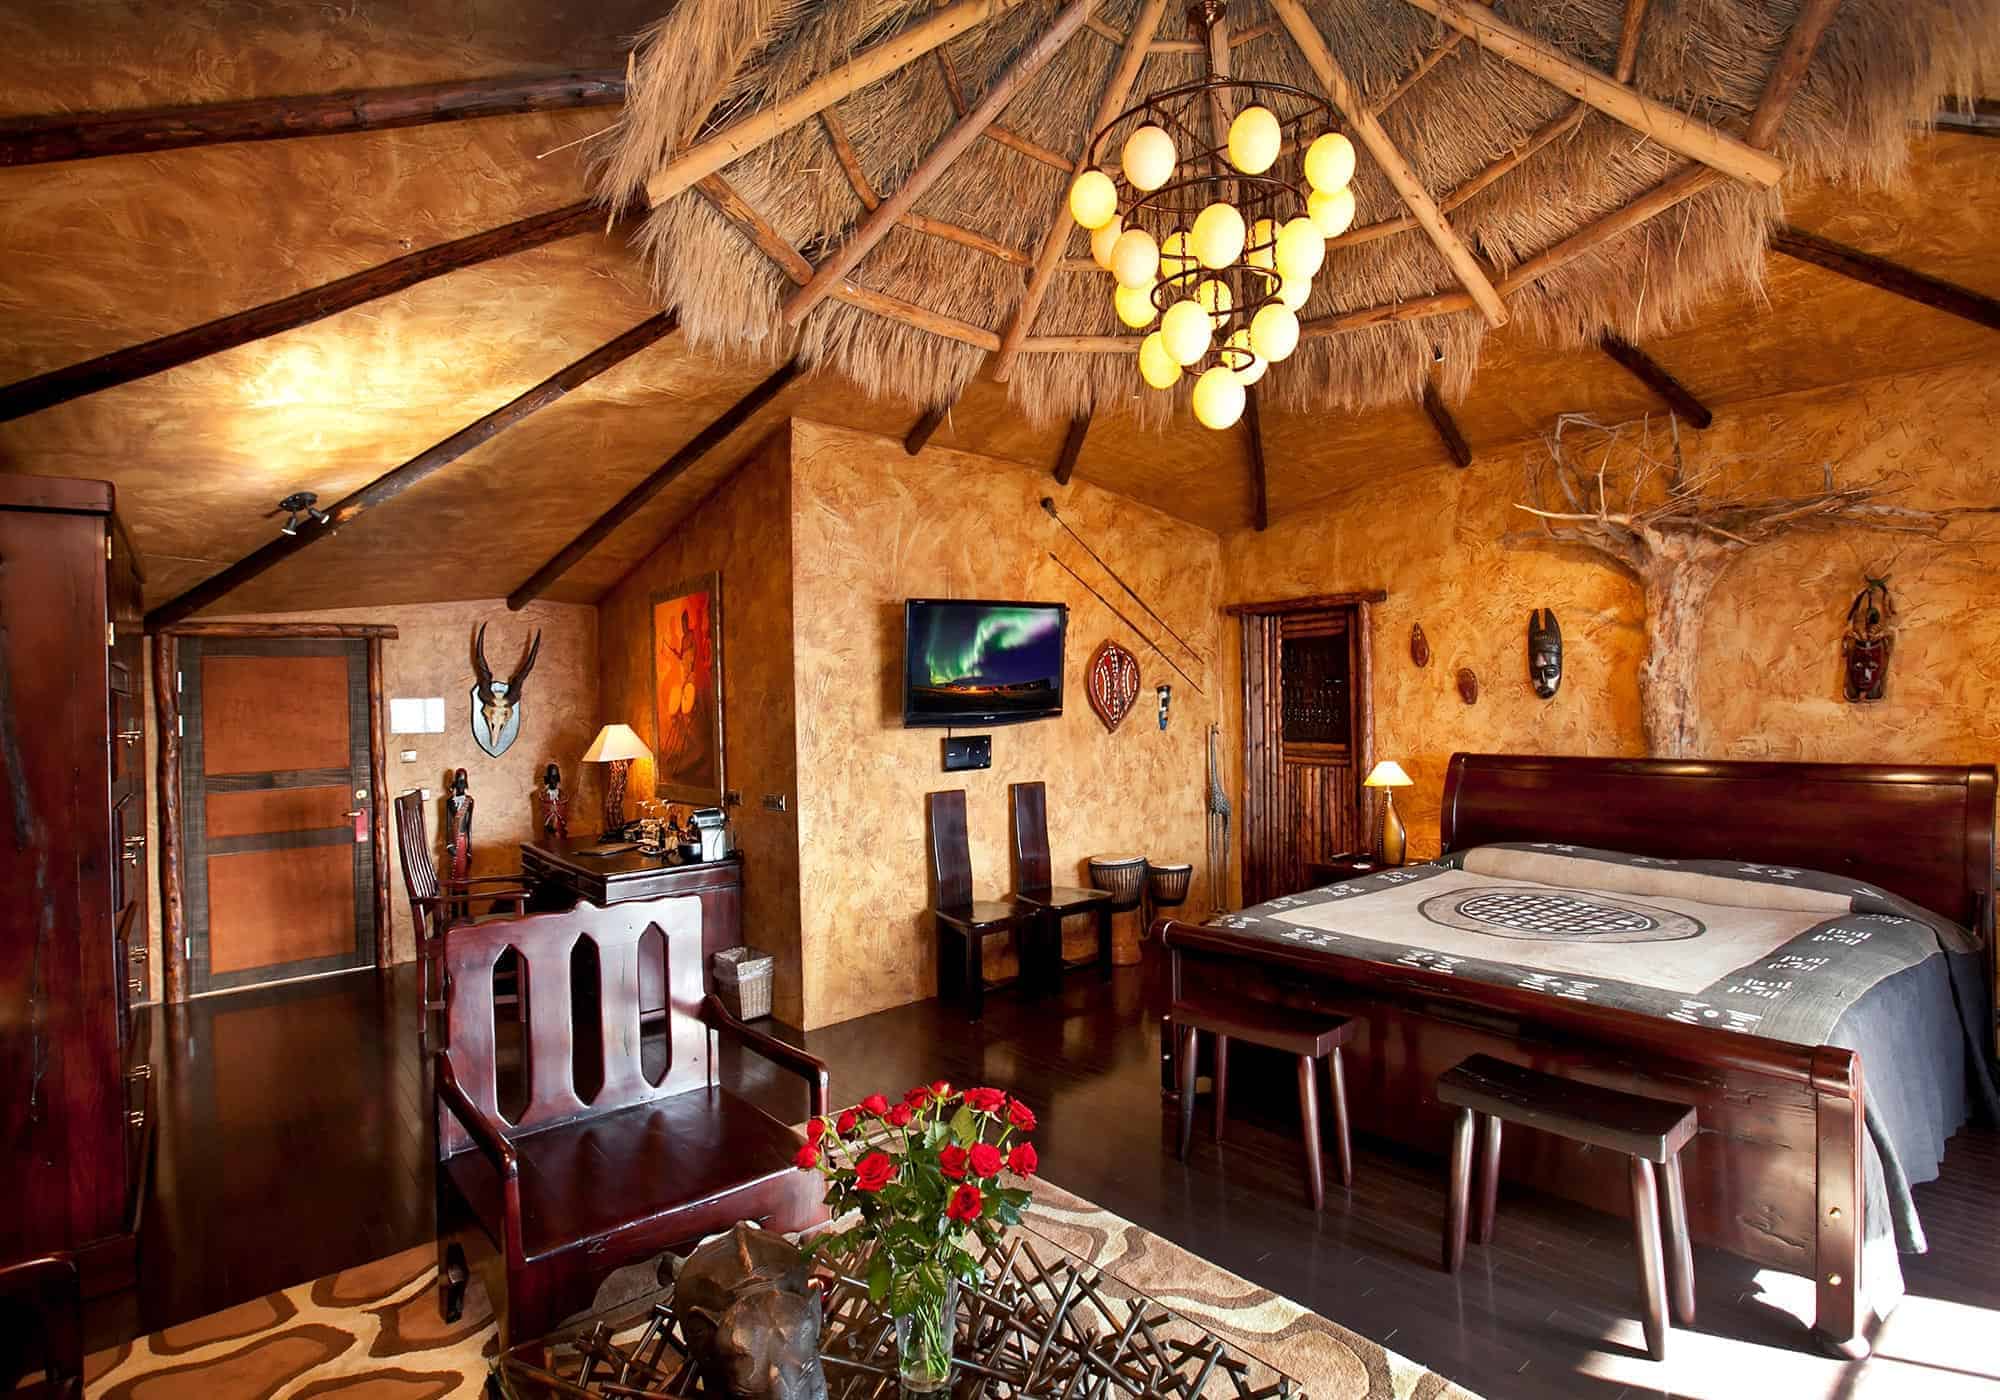 Hotel Rangá Africa Suite decorated with grass roof, traditional artwork and decor.